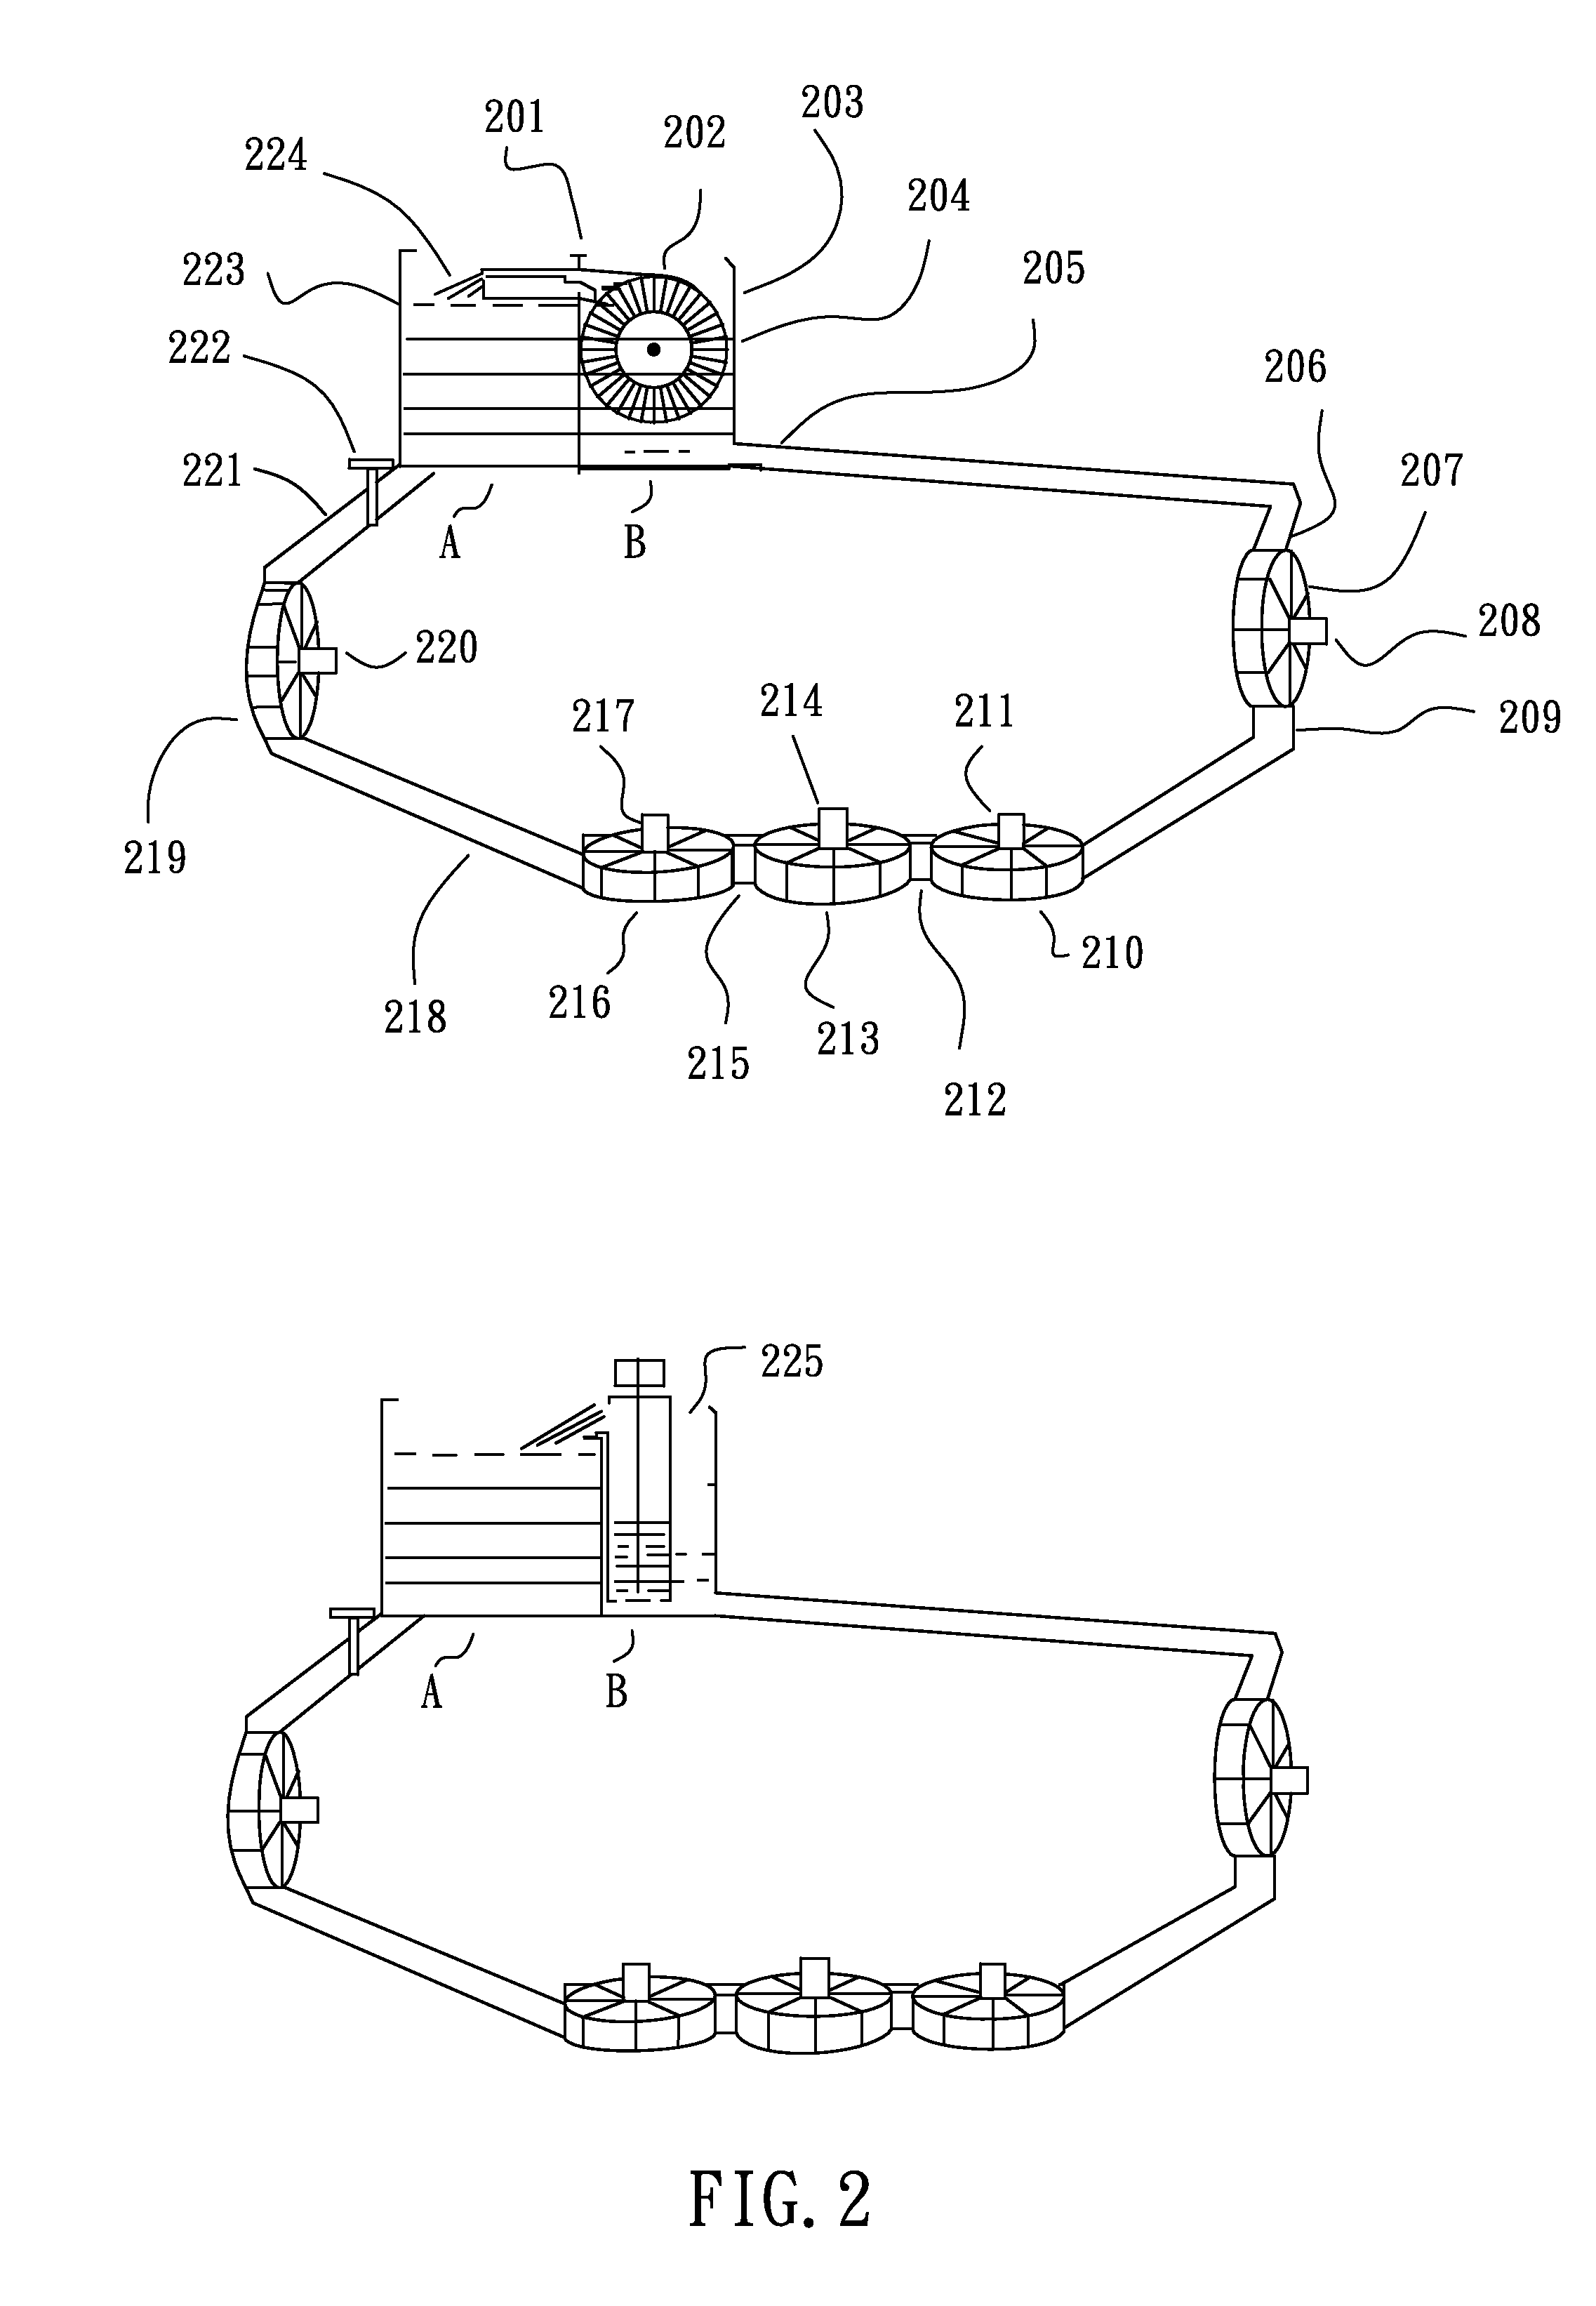 Device and method for utilizing water flow kinetic energy continuously